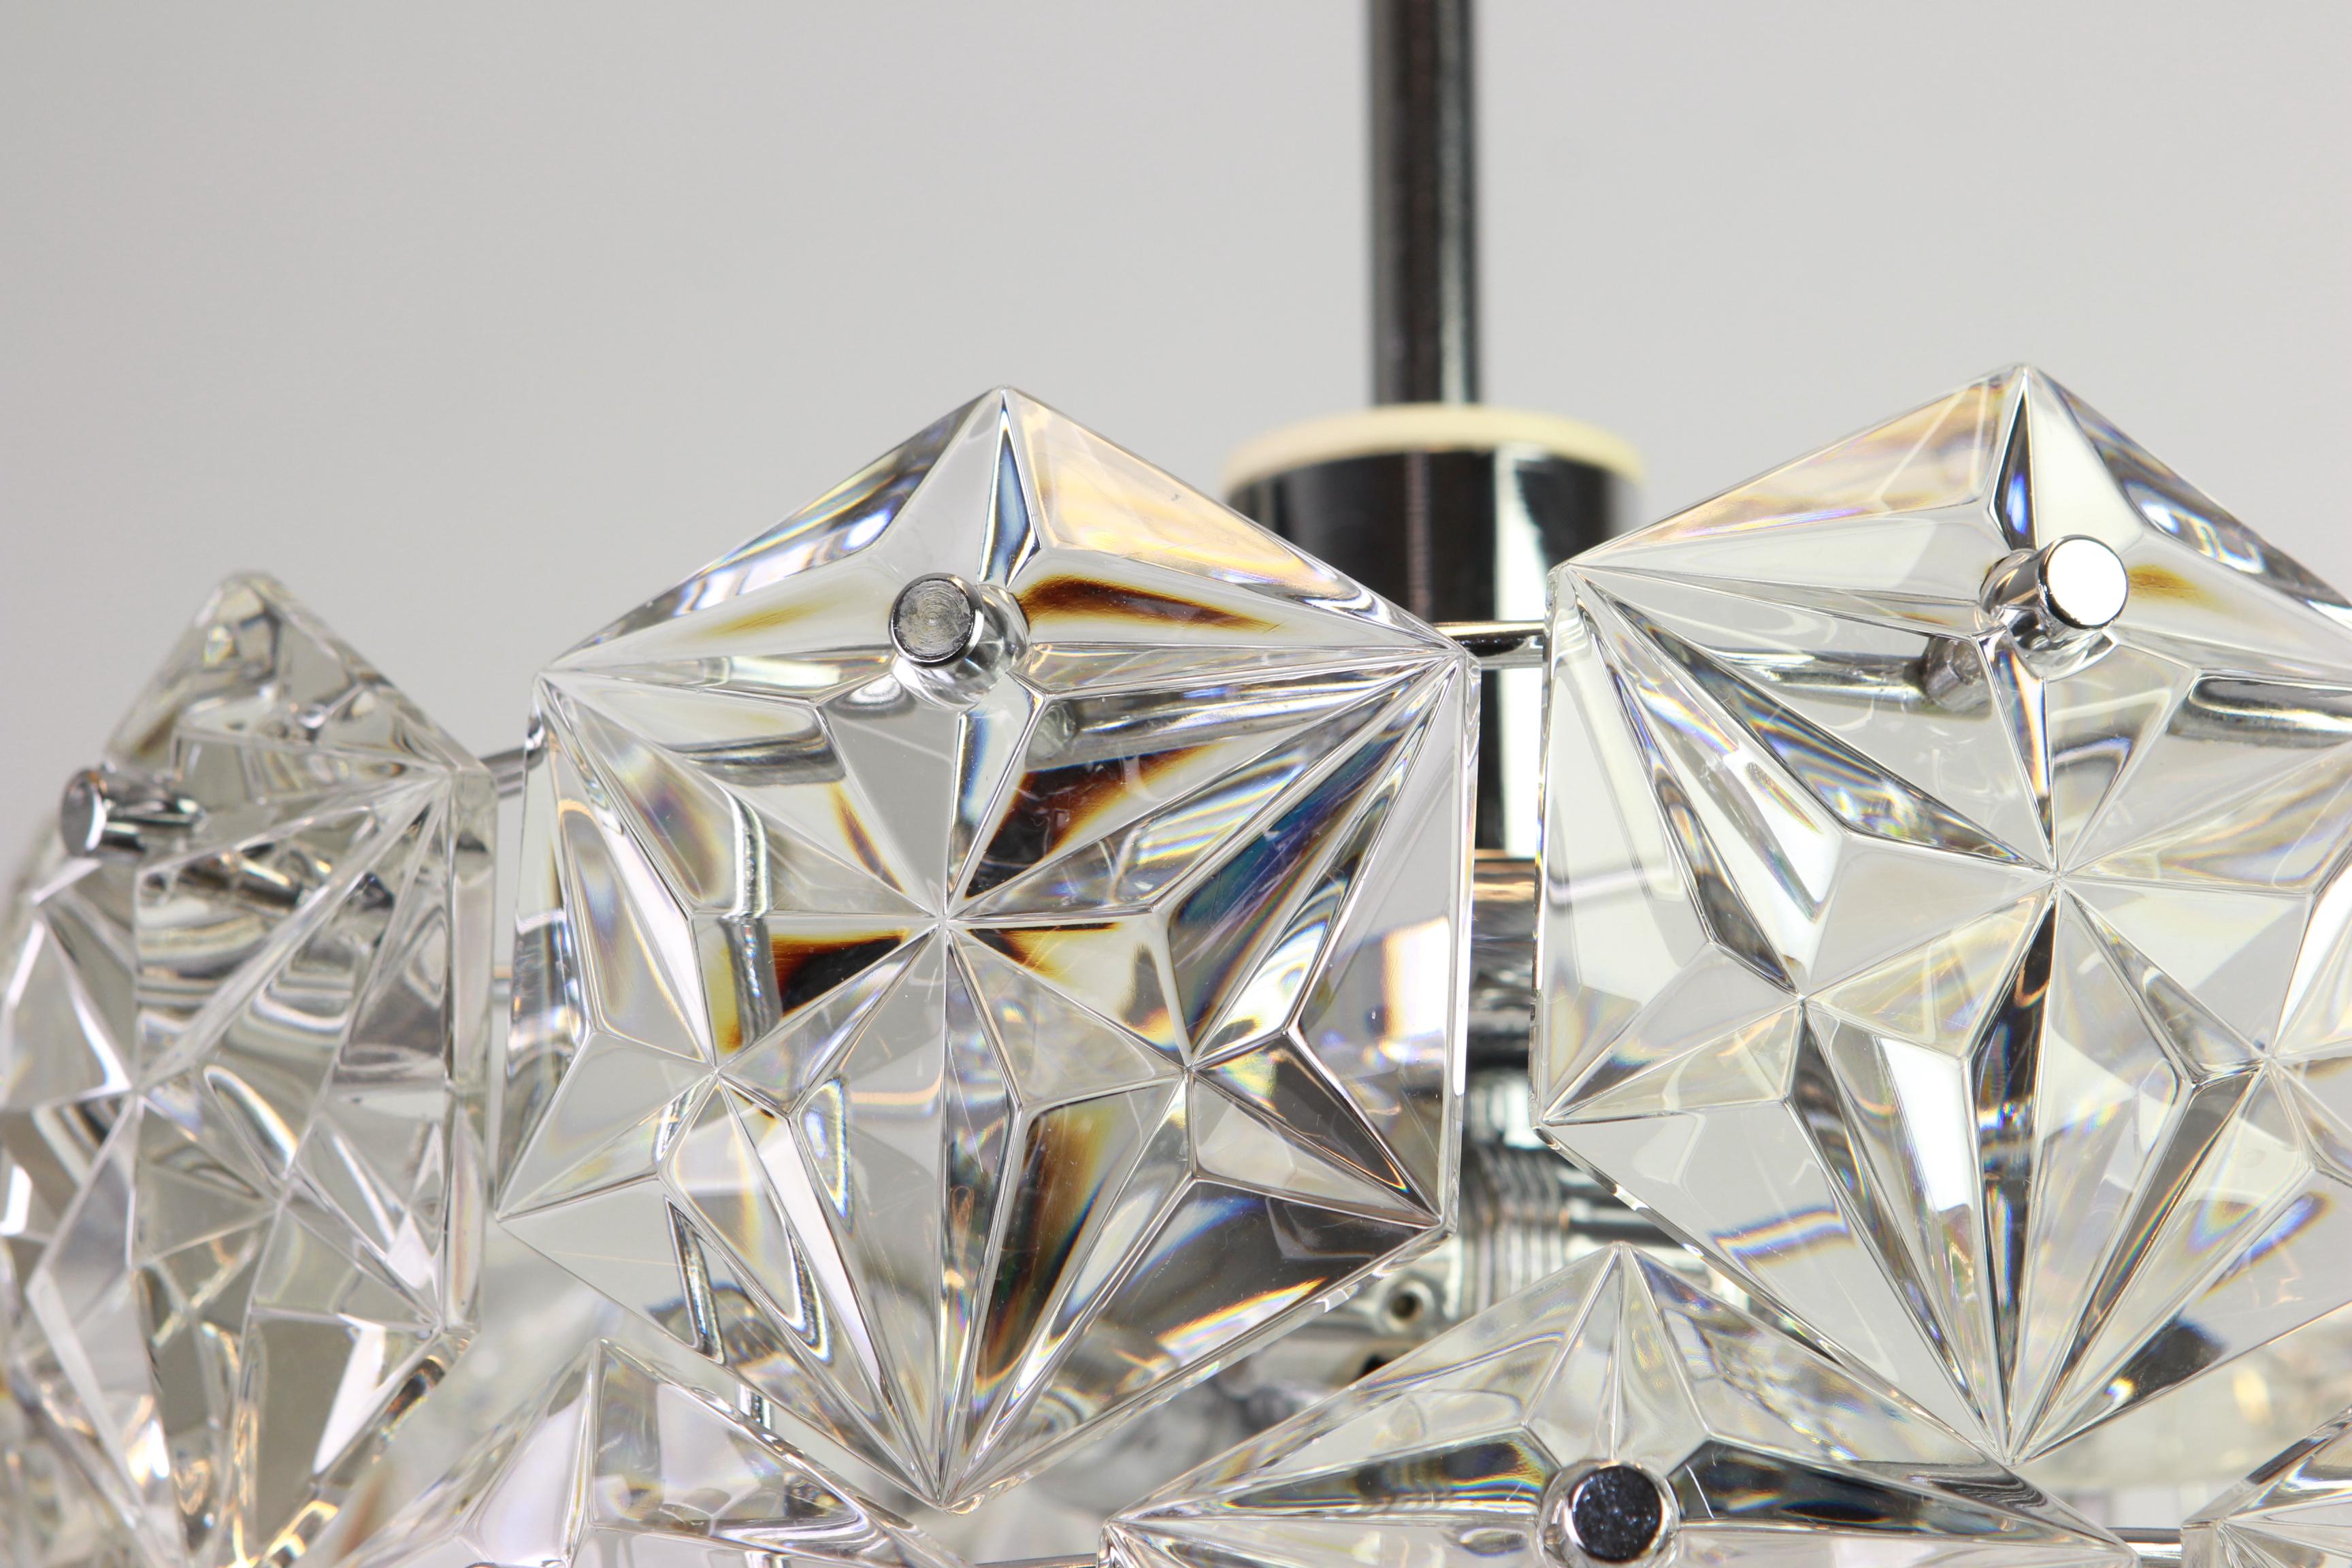 Mid-Century Modern 1 of 2 Stunning Chandelier, Chrome and Crystal Glass by Kinkeldey, Germany, 1970 For Sale